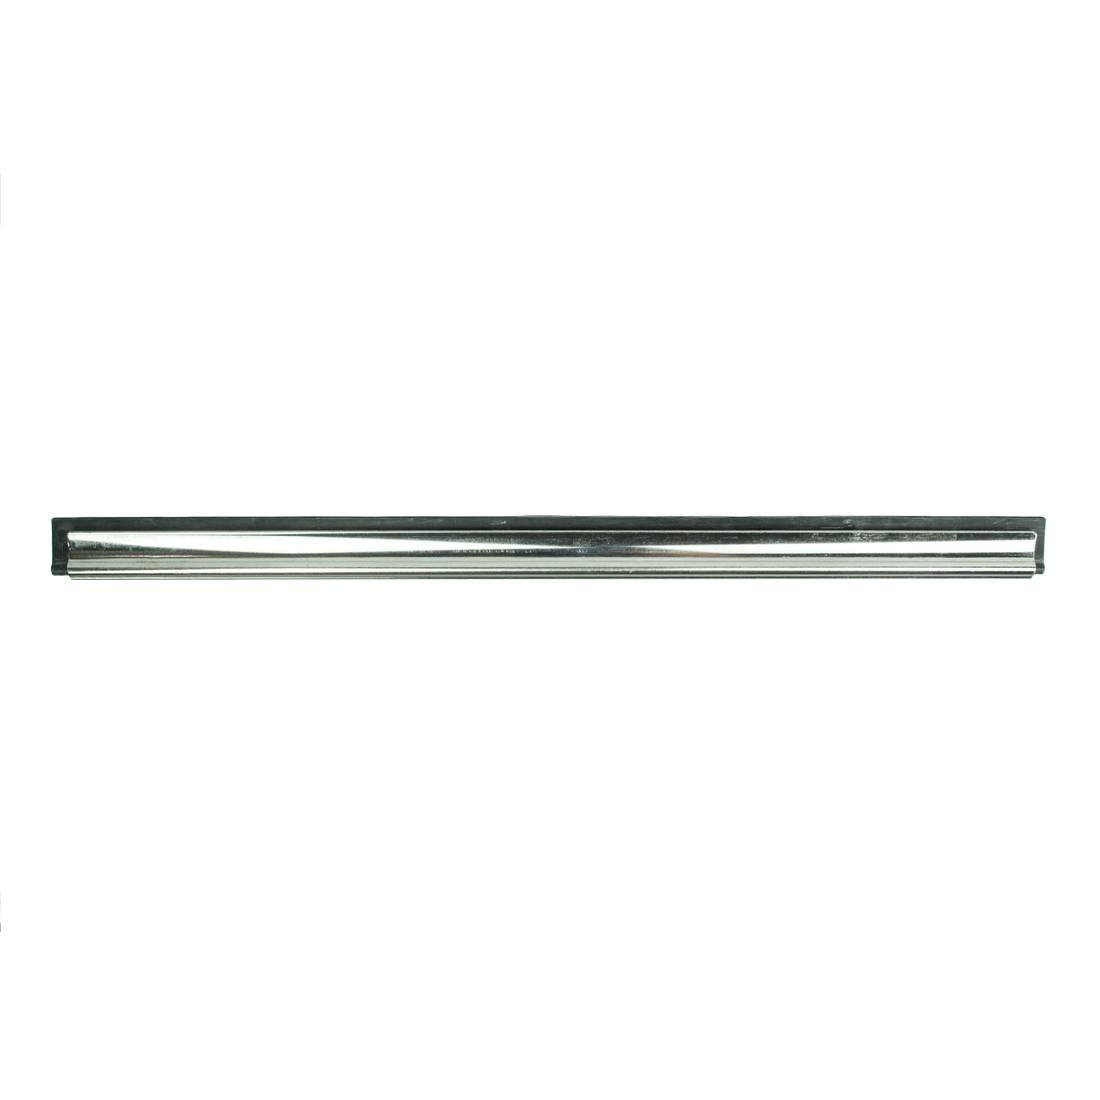 Pulex Stainless Steel Squeegee Channel Front View